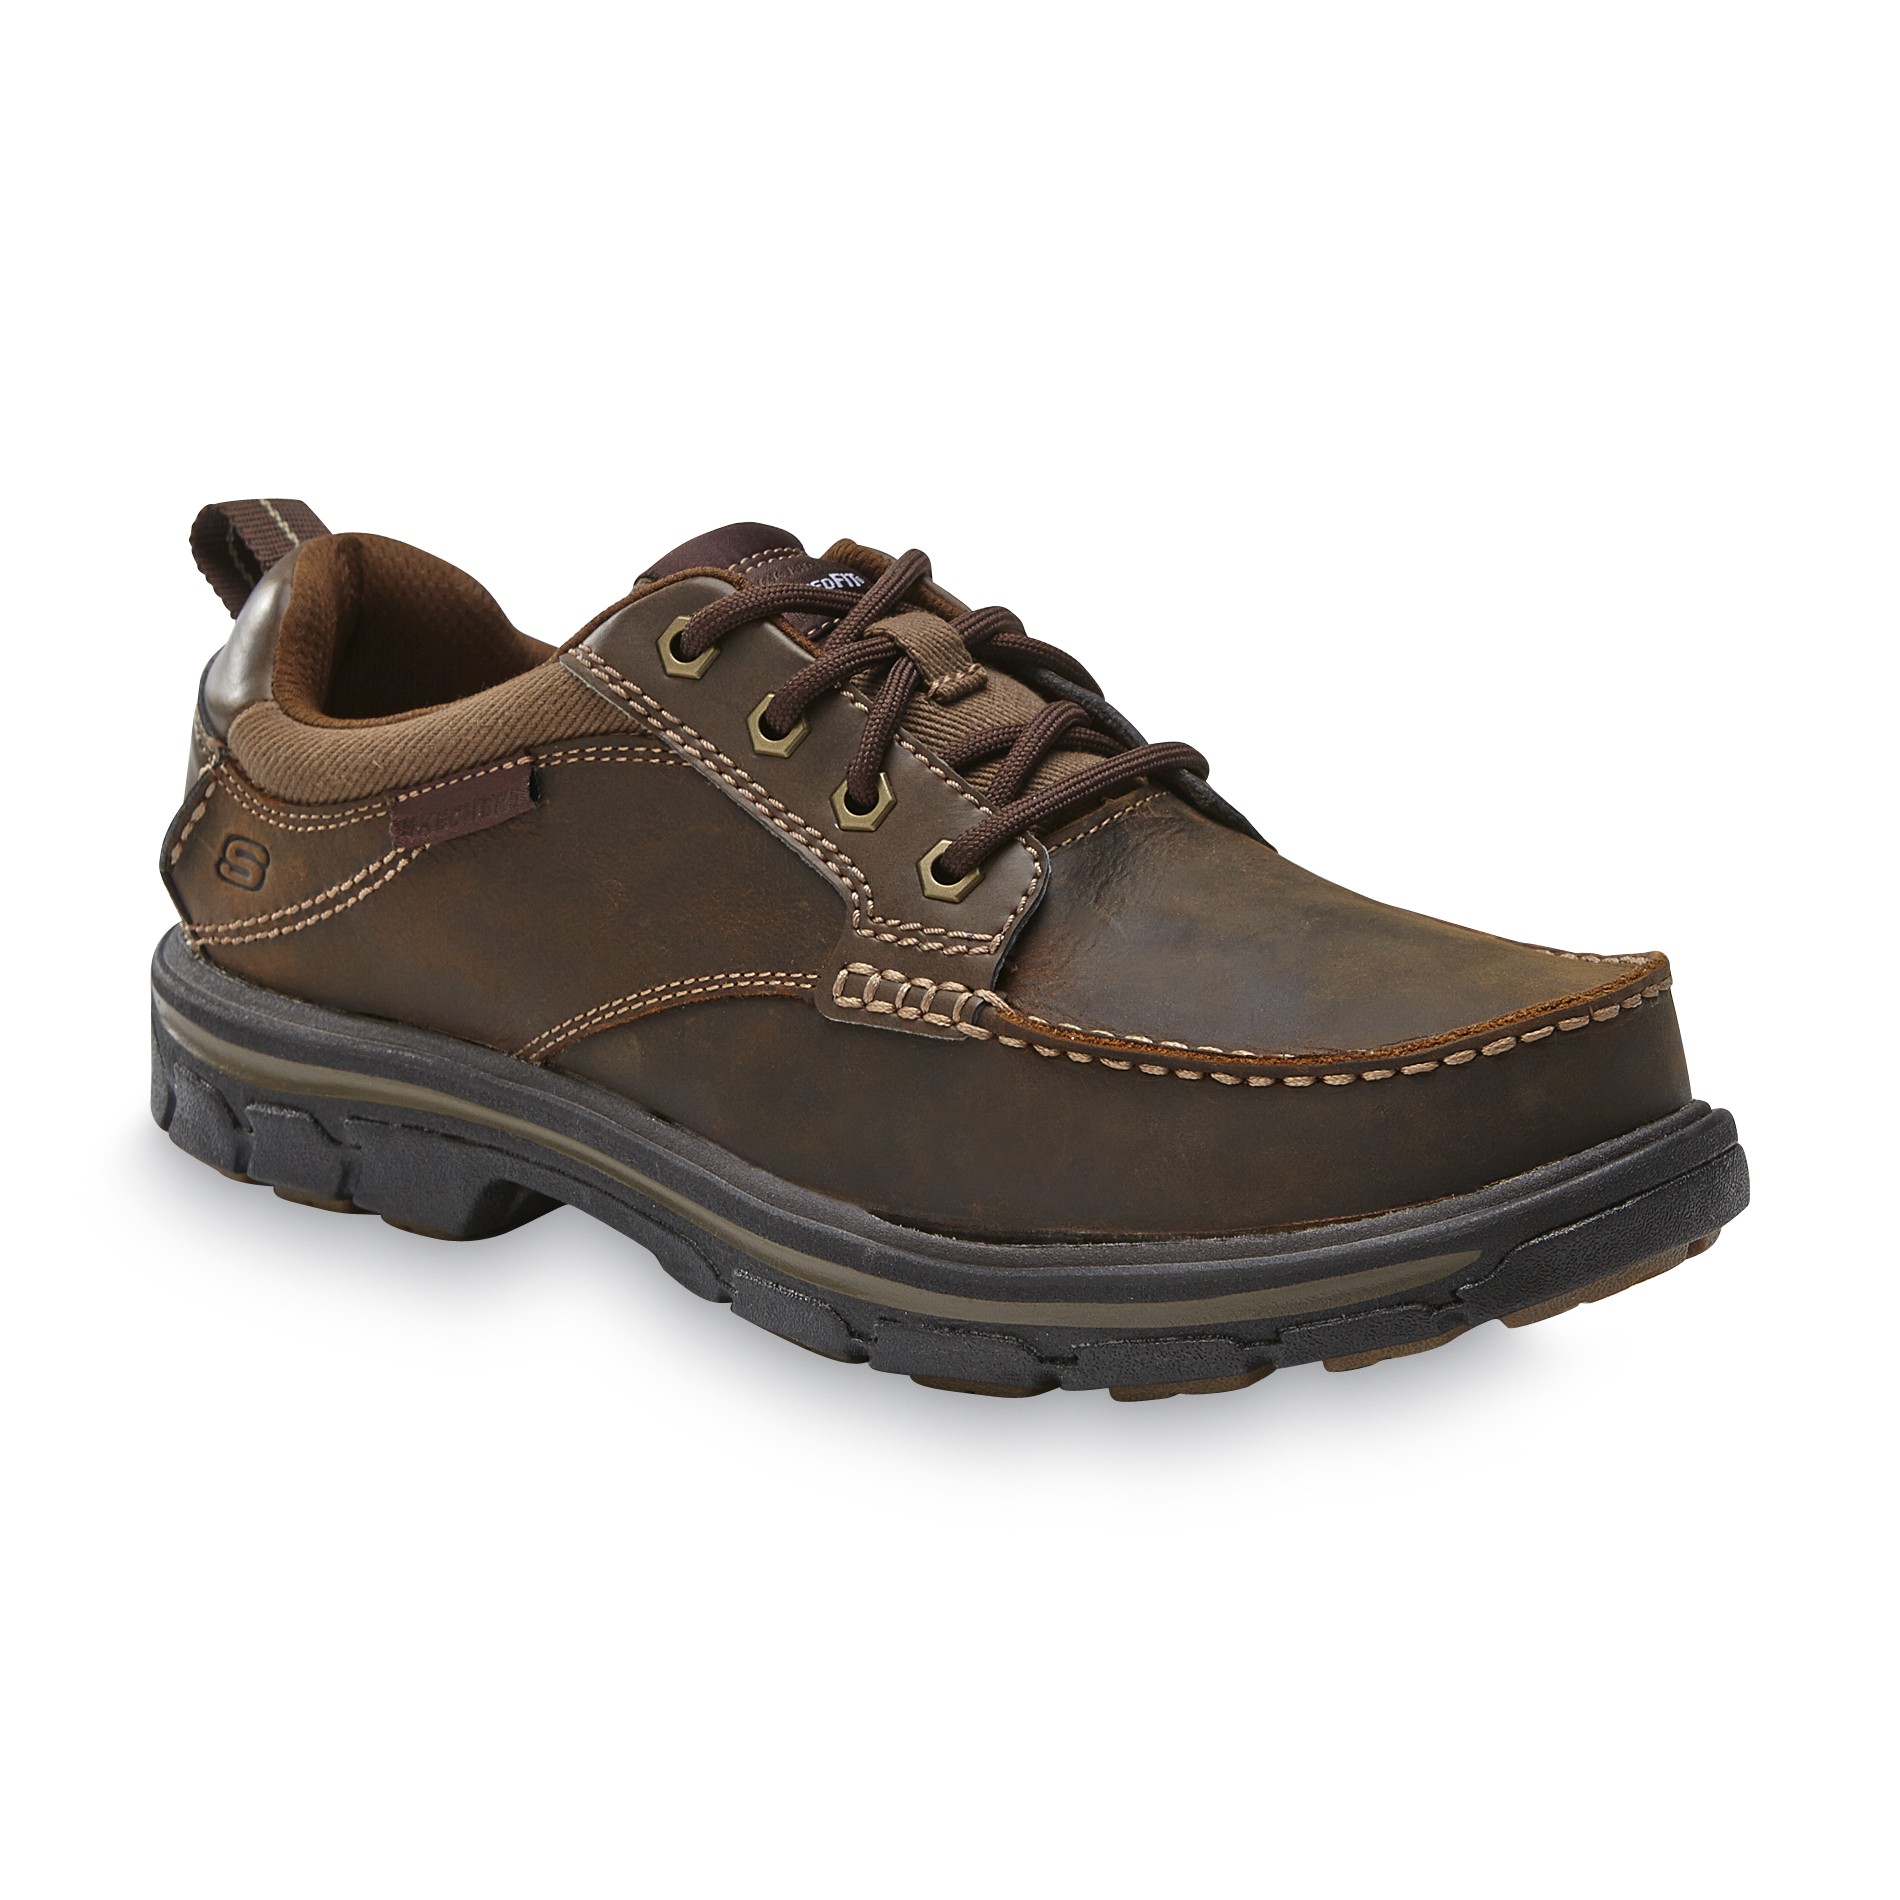 Men's Davin Relaxed Fit Casual Oxford Shoe - Brown